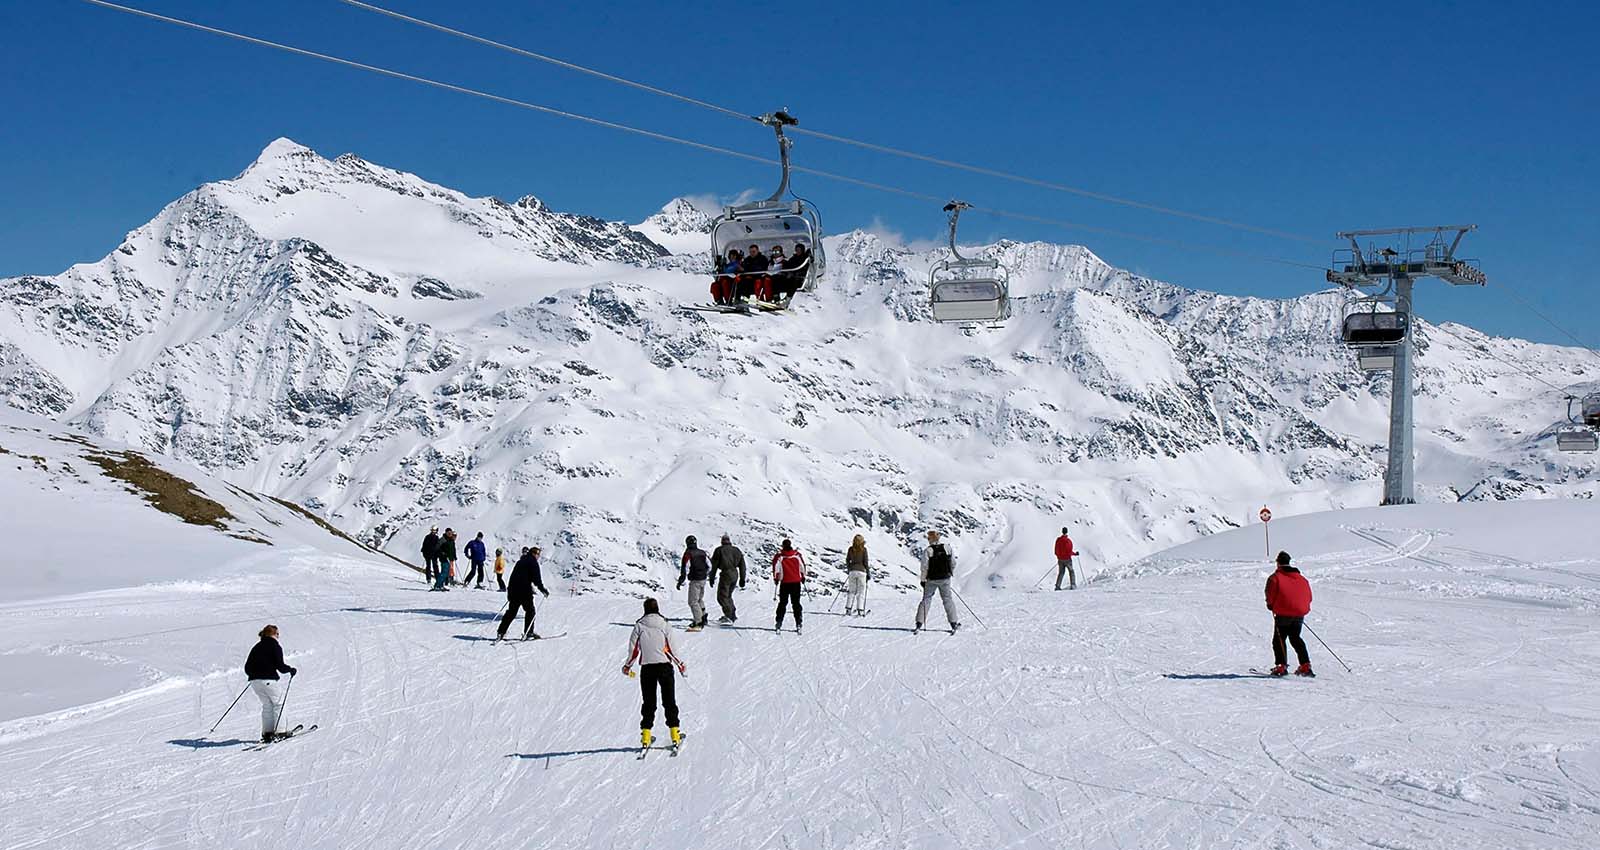 Take your school or group on ski trip to Italy